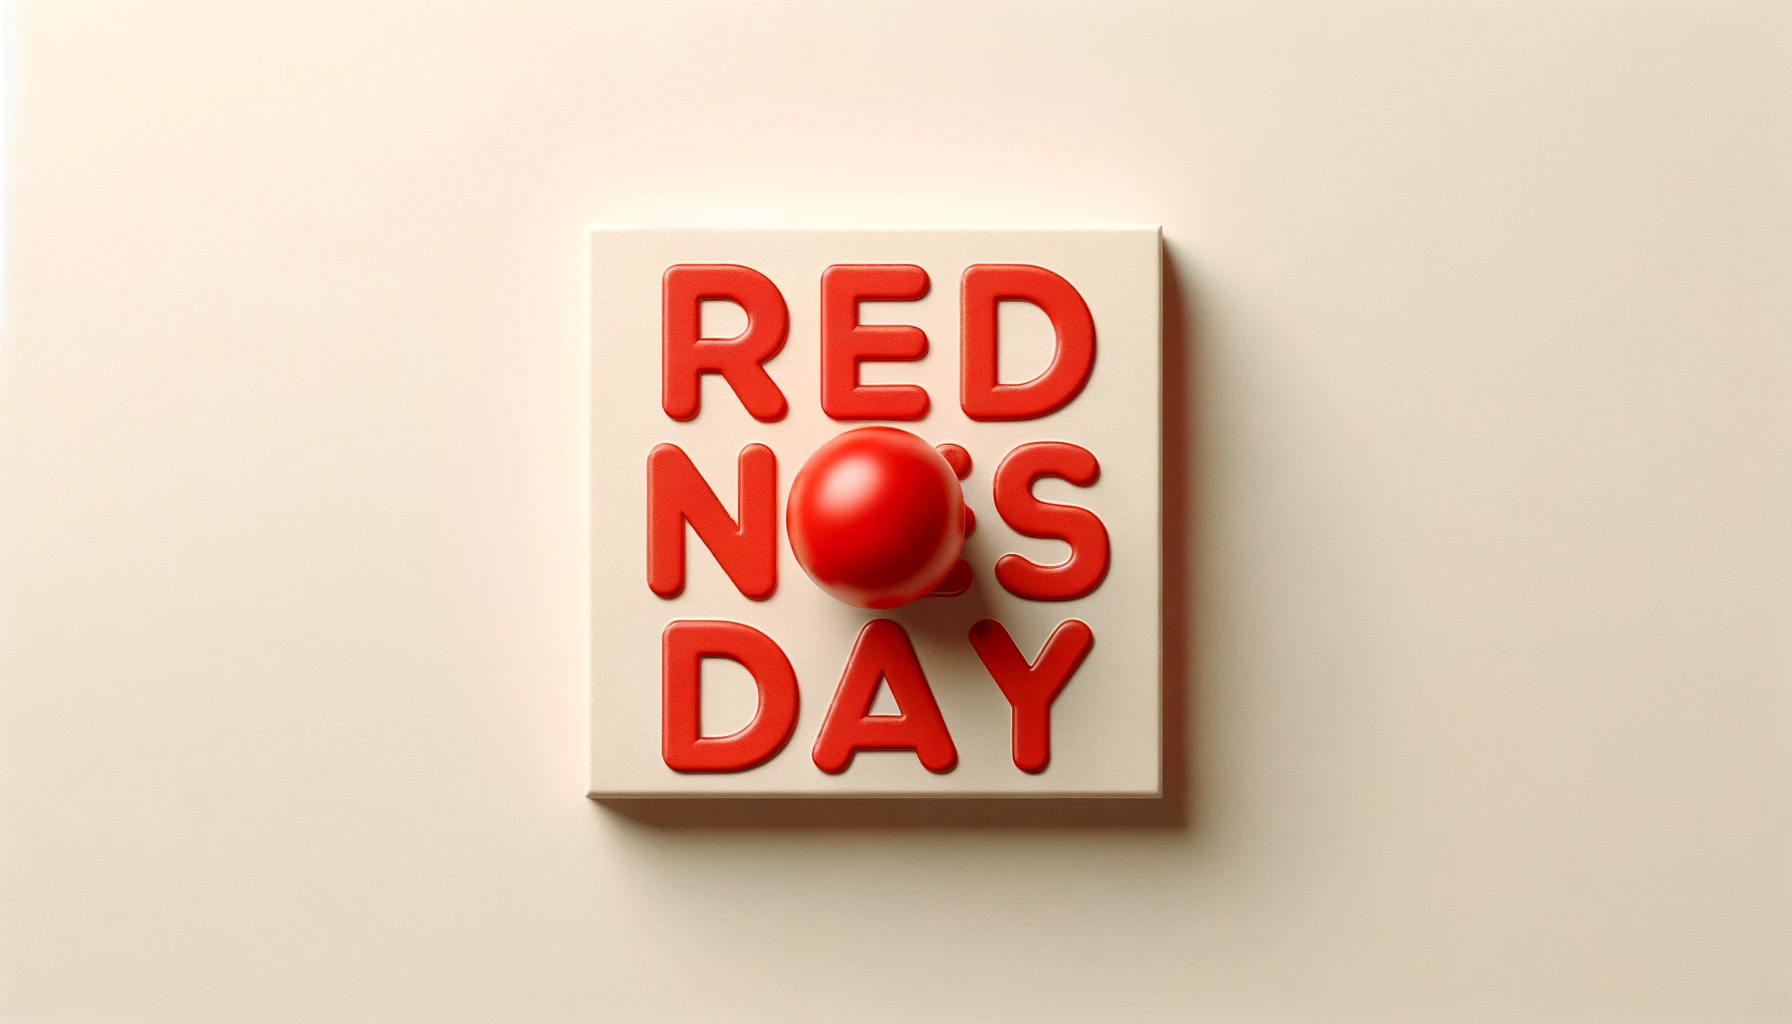 Laugh Out Loud with These Red Nose Day Greetings